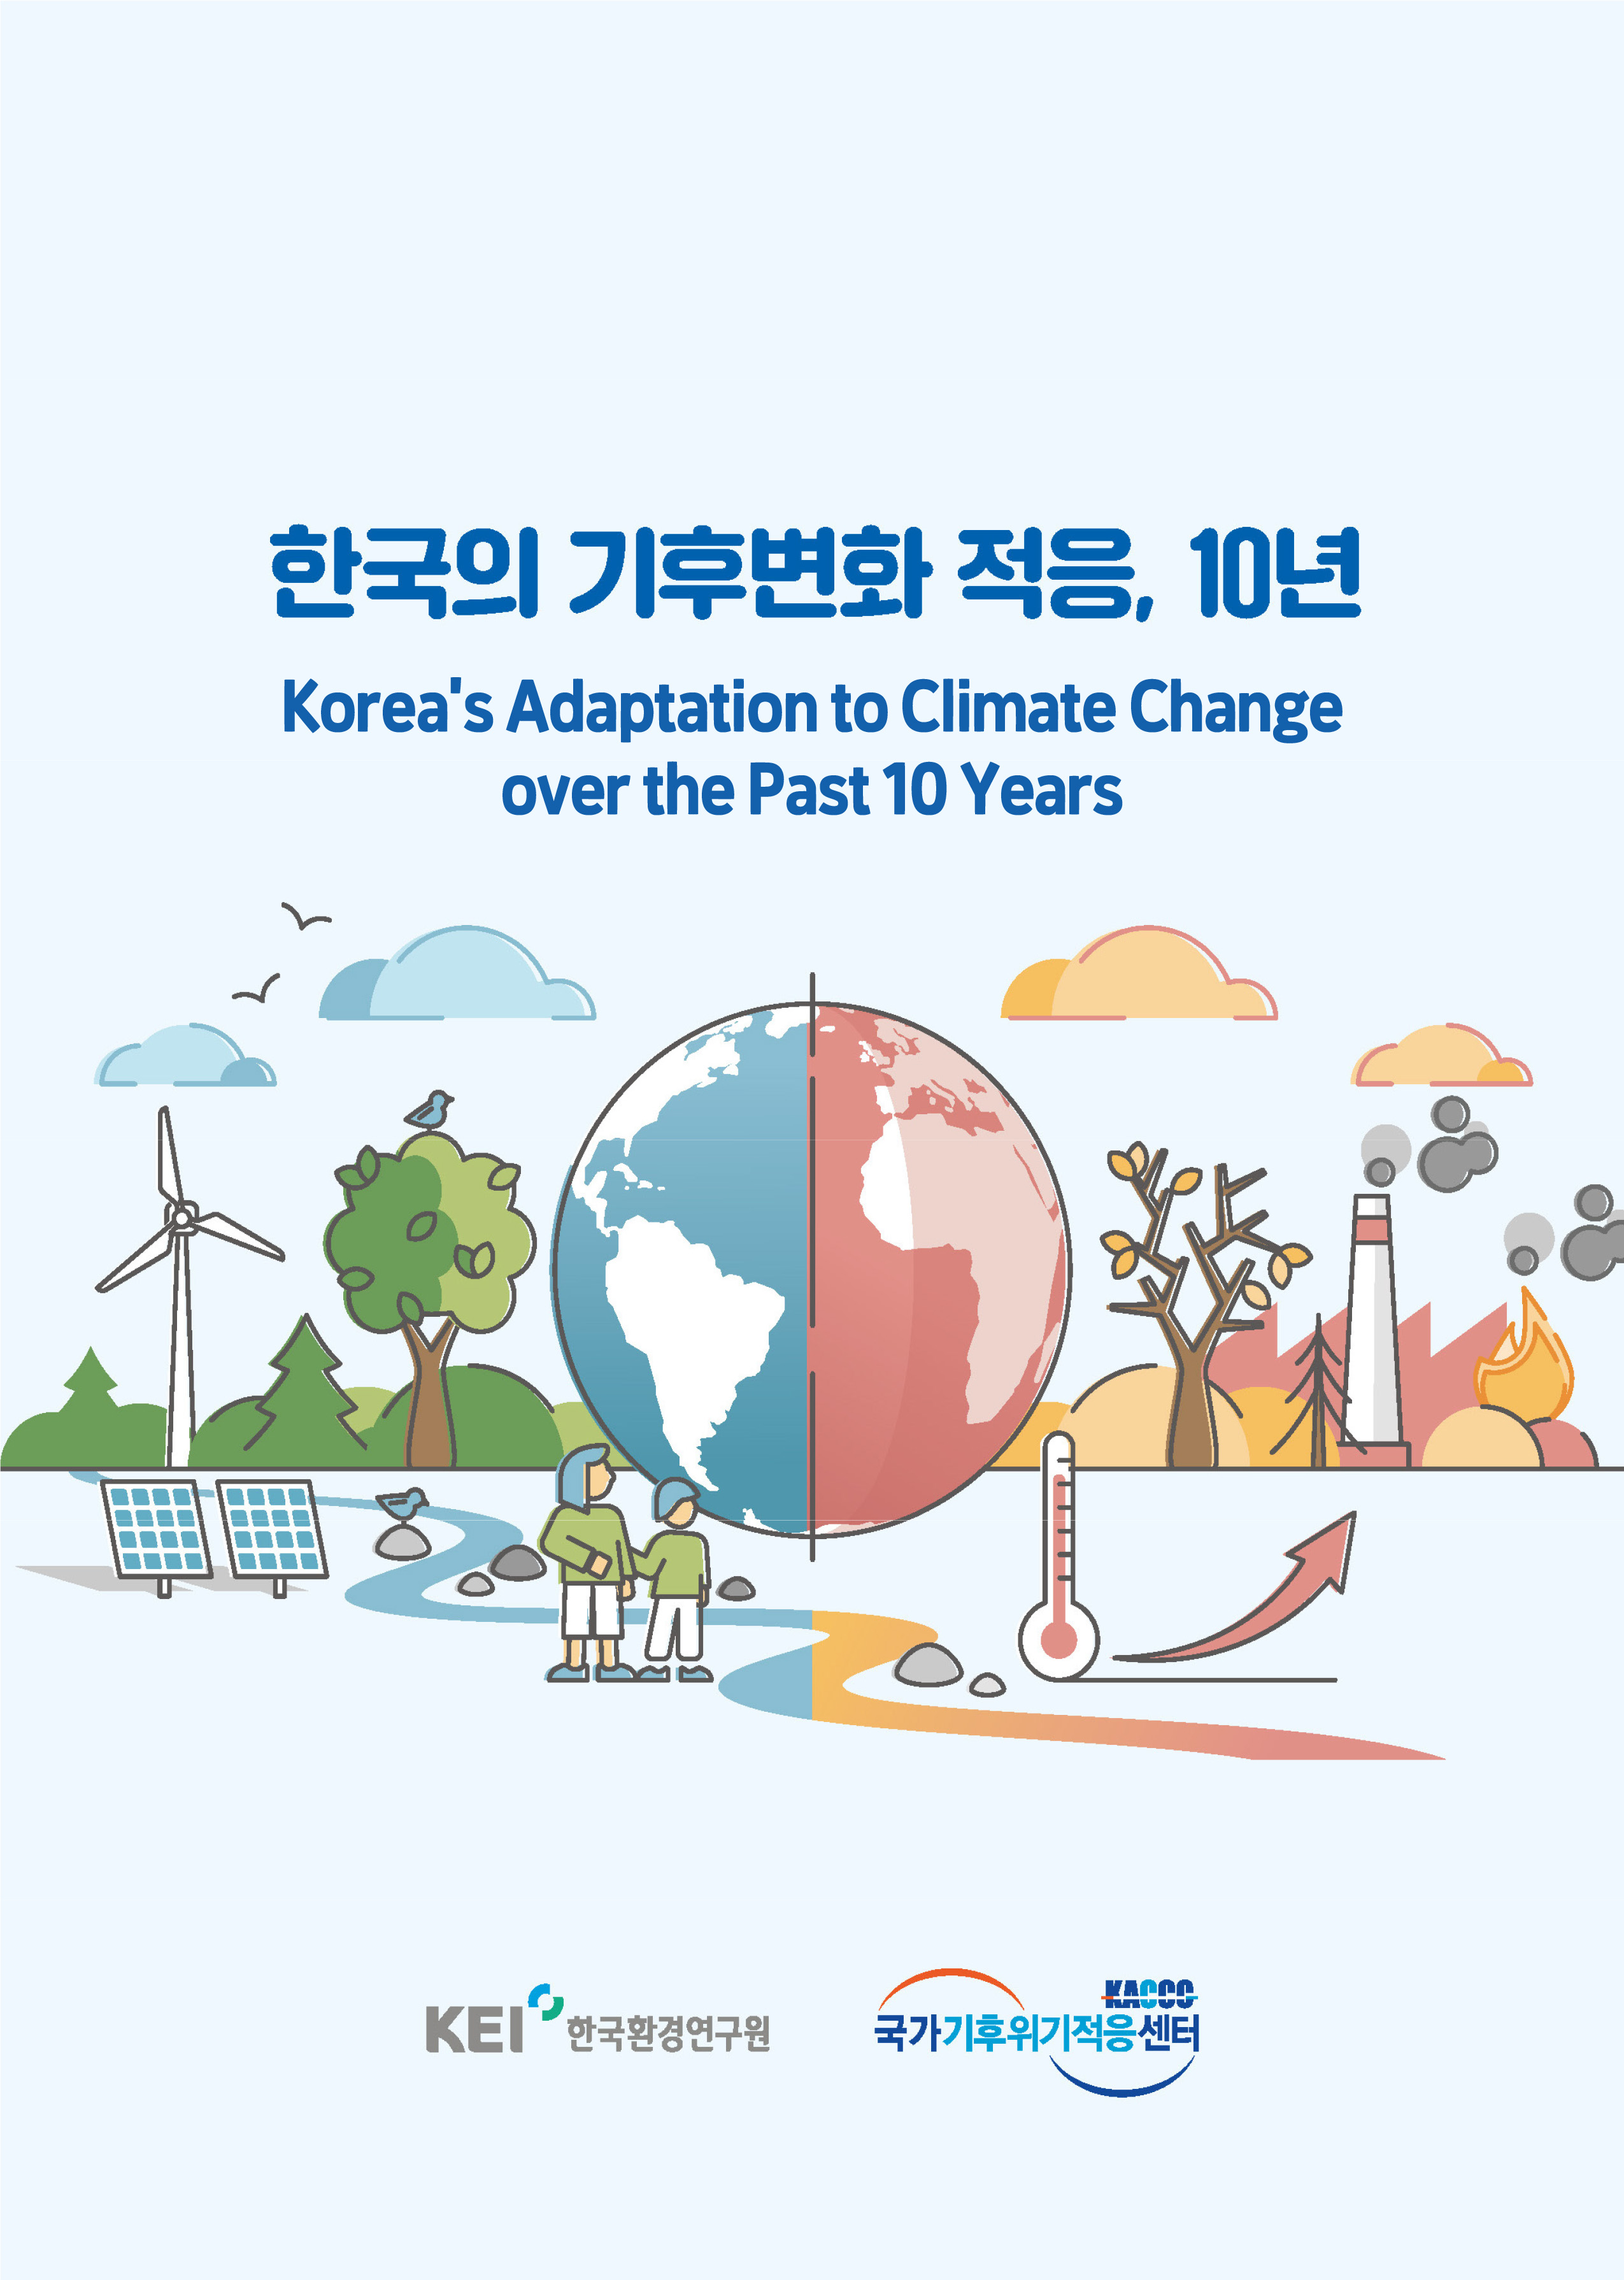 [KEI KACCC] Korea's Adaptation to Climate Change over the Past 10 Years